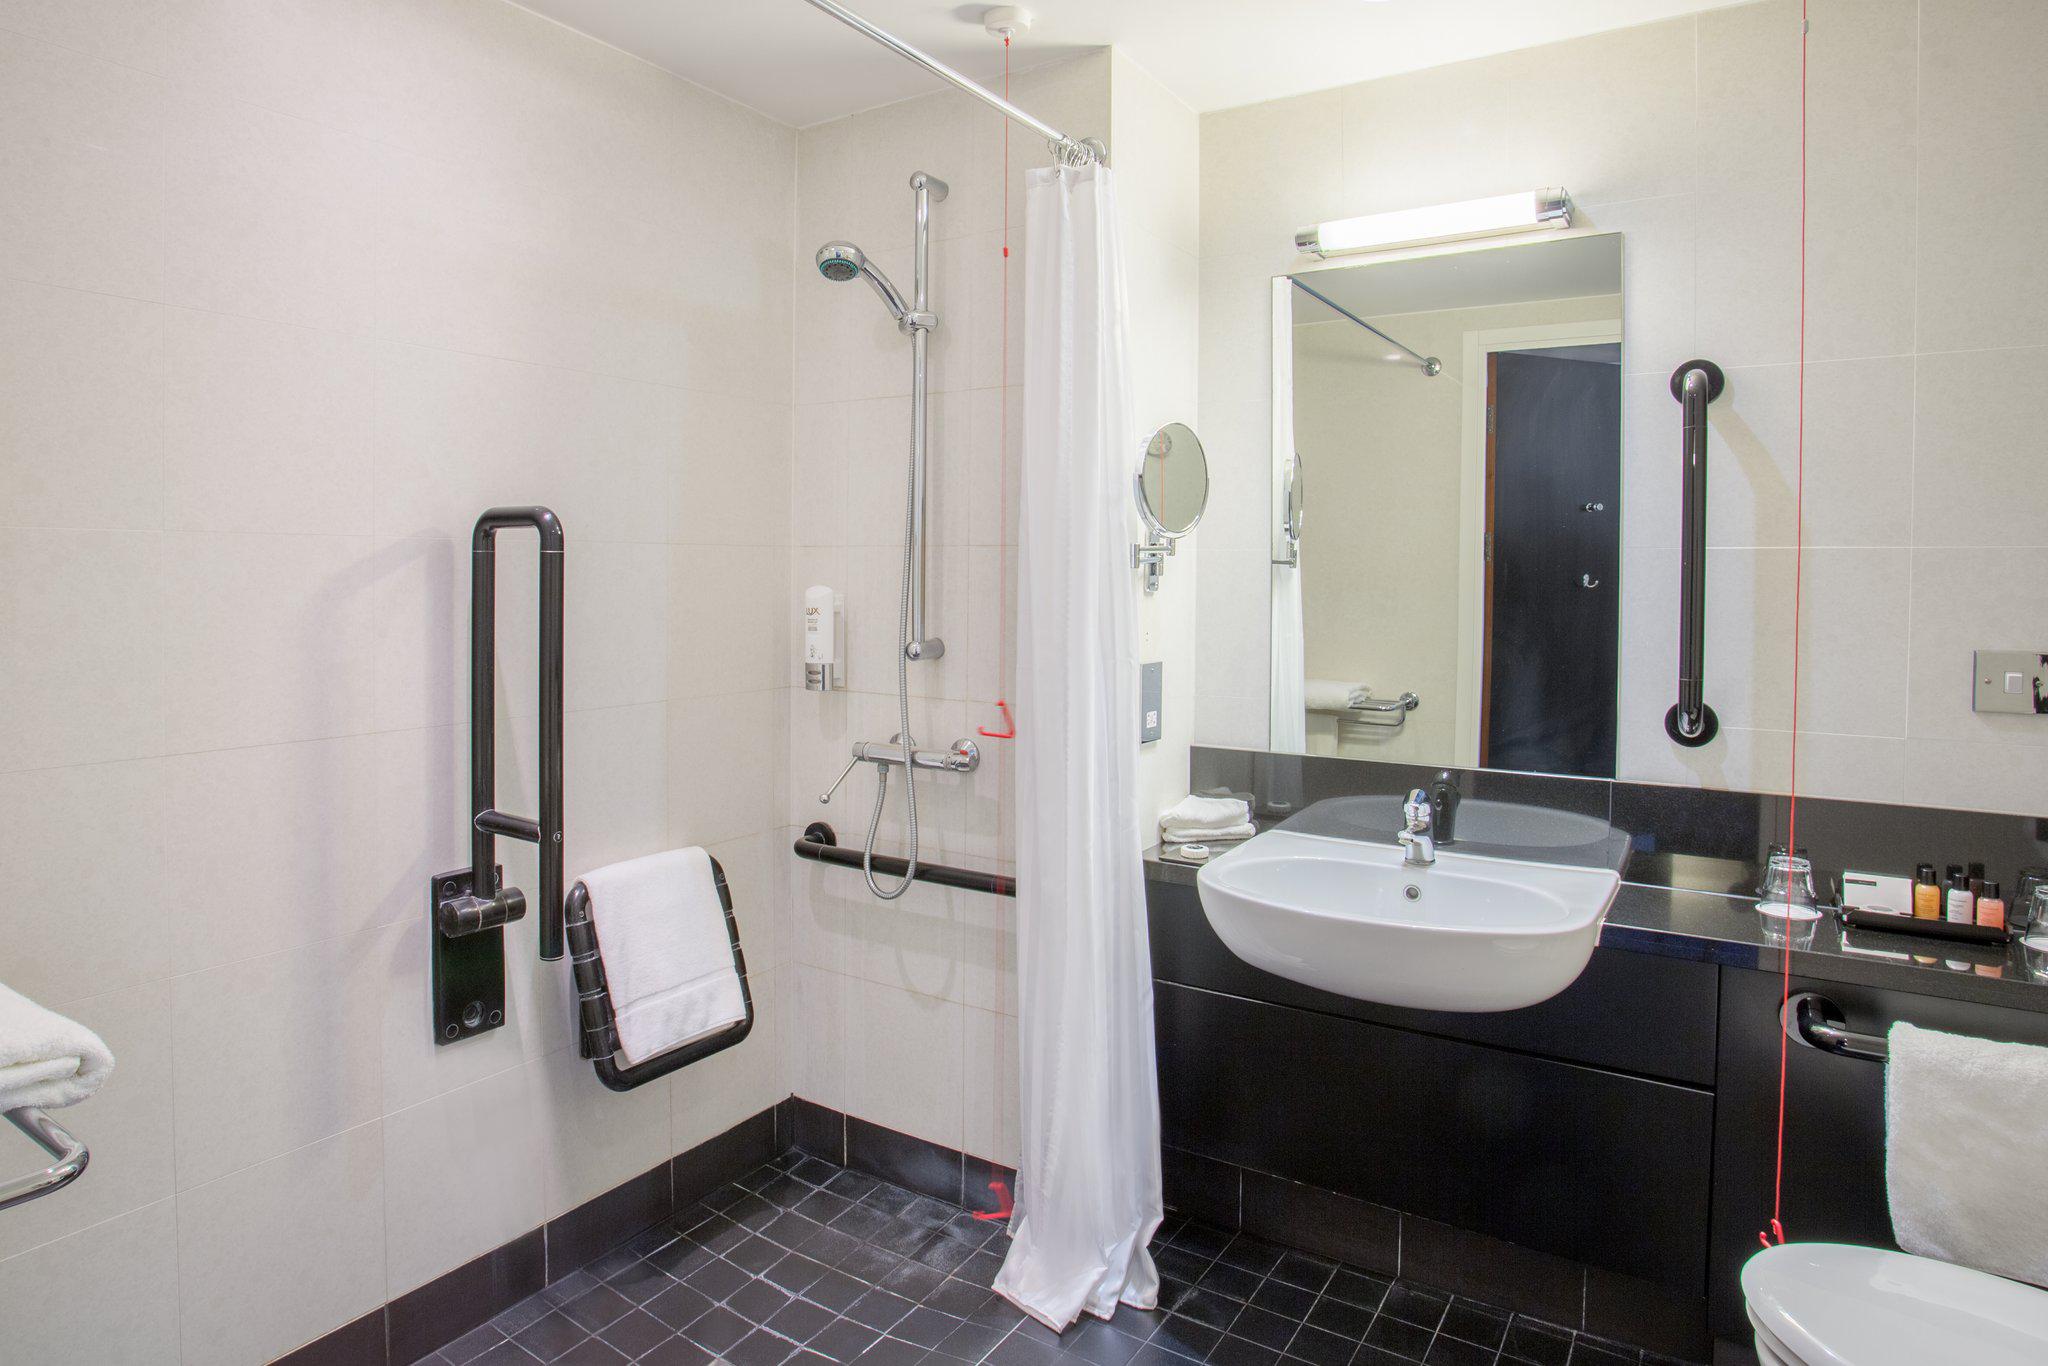 Images Crowne Plaza Marlow, an IHG Hotel